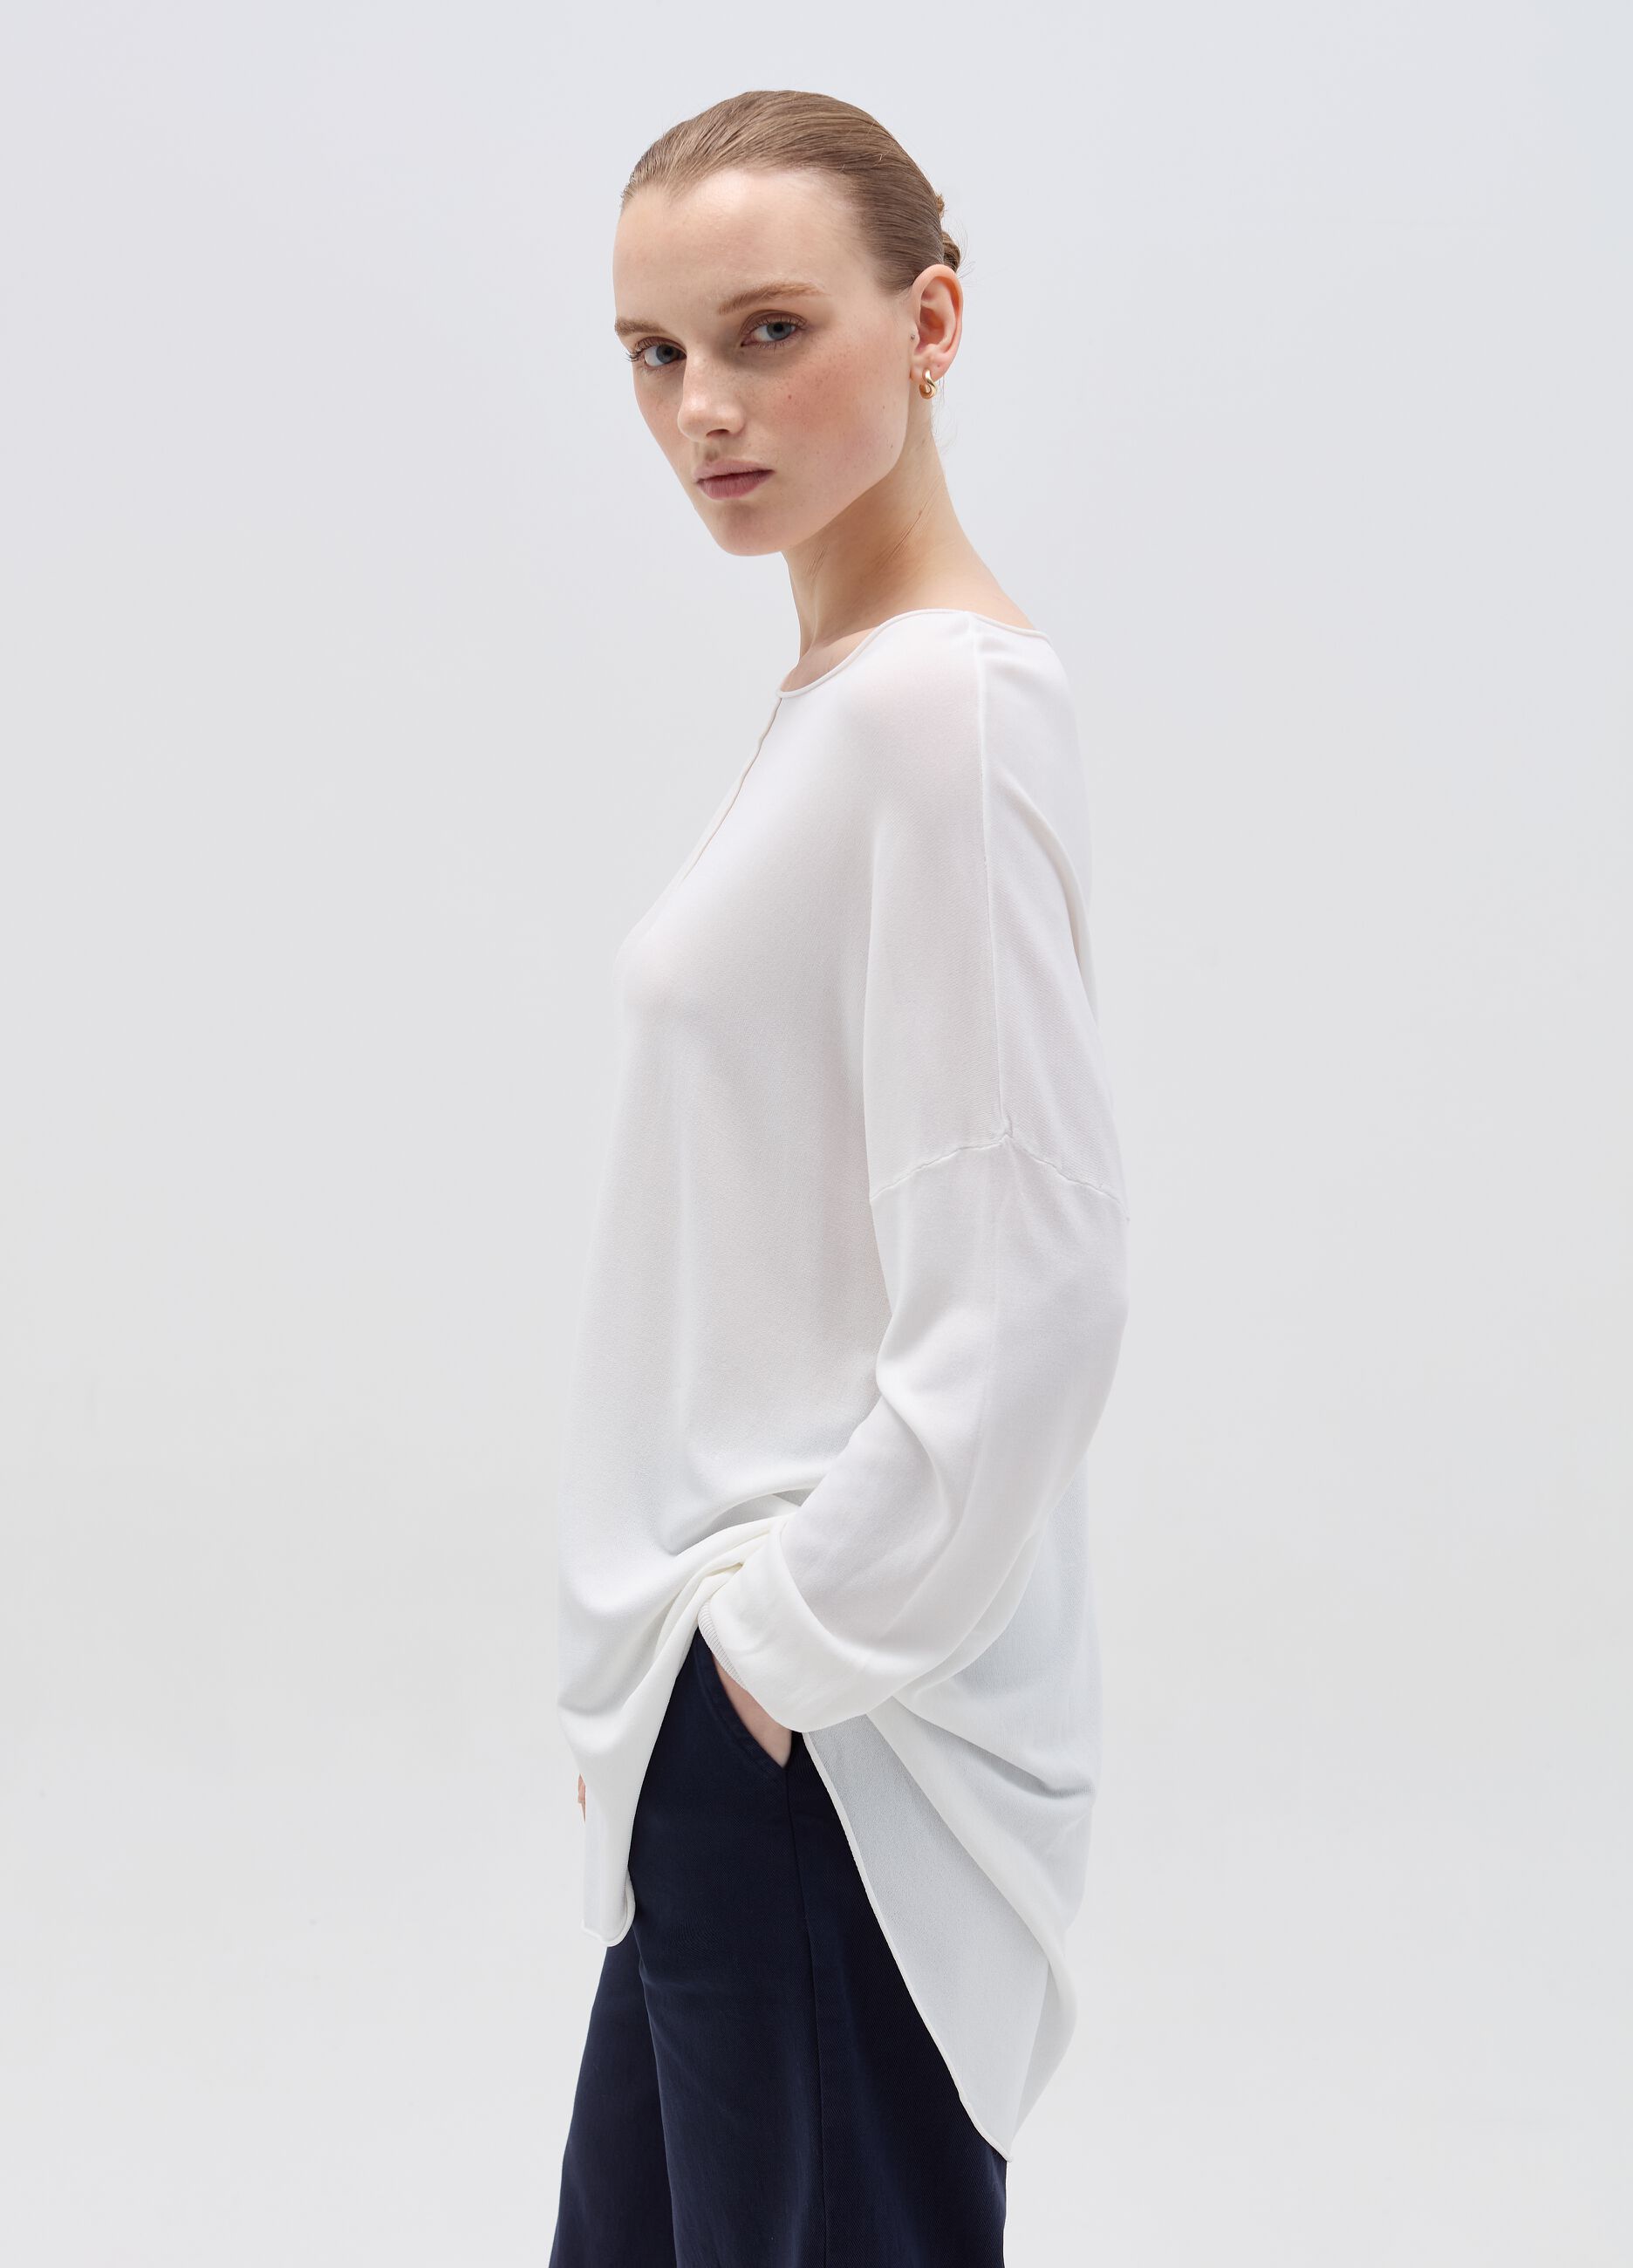 Long oversized top with raised stitching